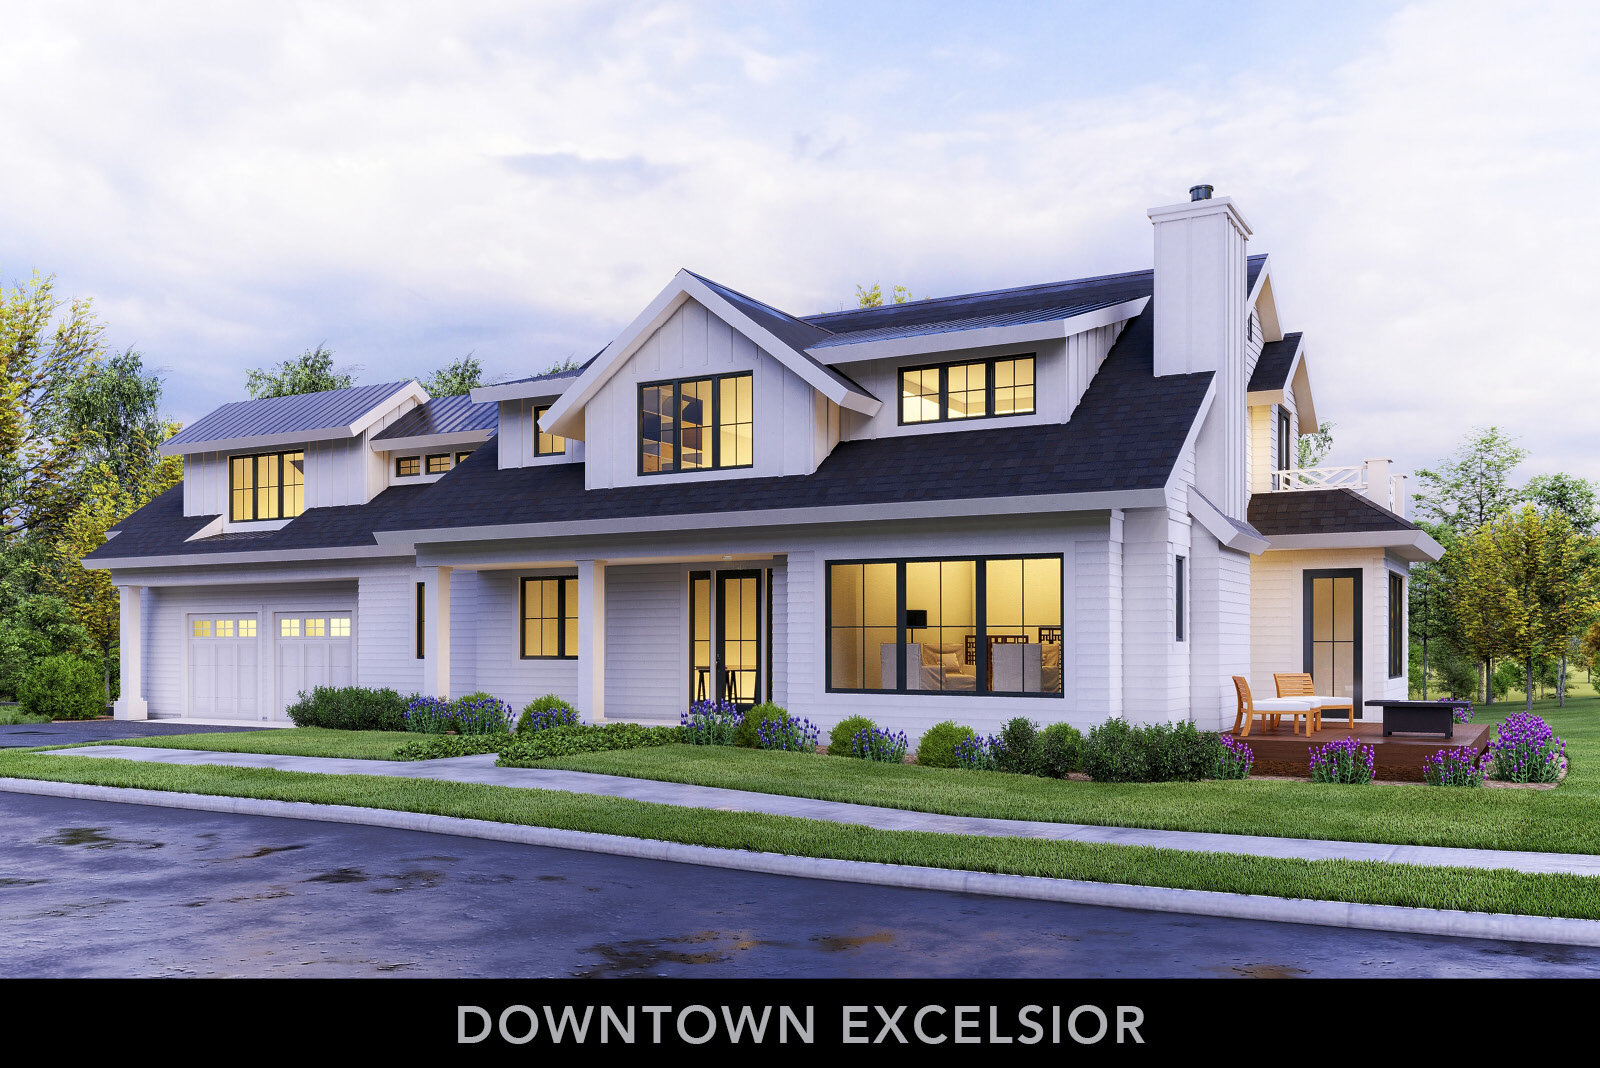 SOLD: New Construction 301 3rd St, Excelsior - $1,699,000